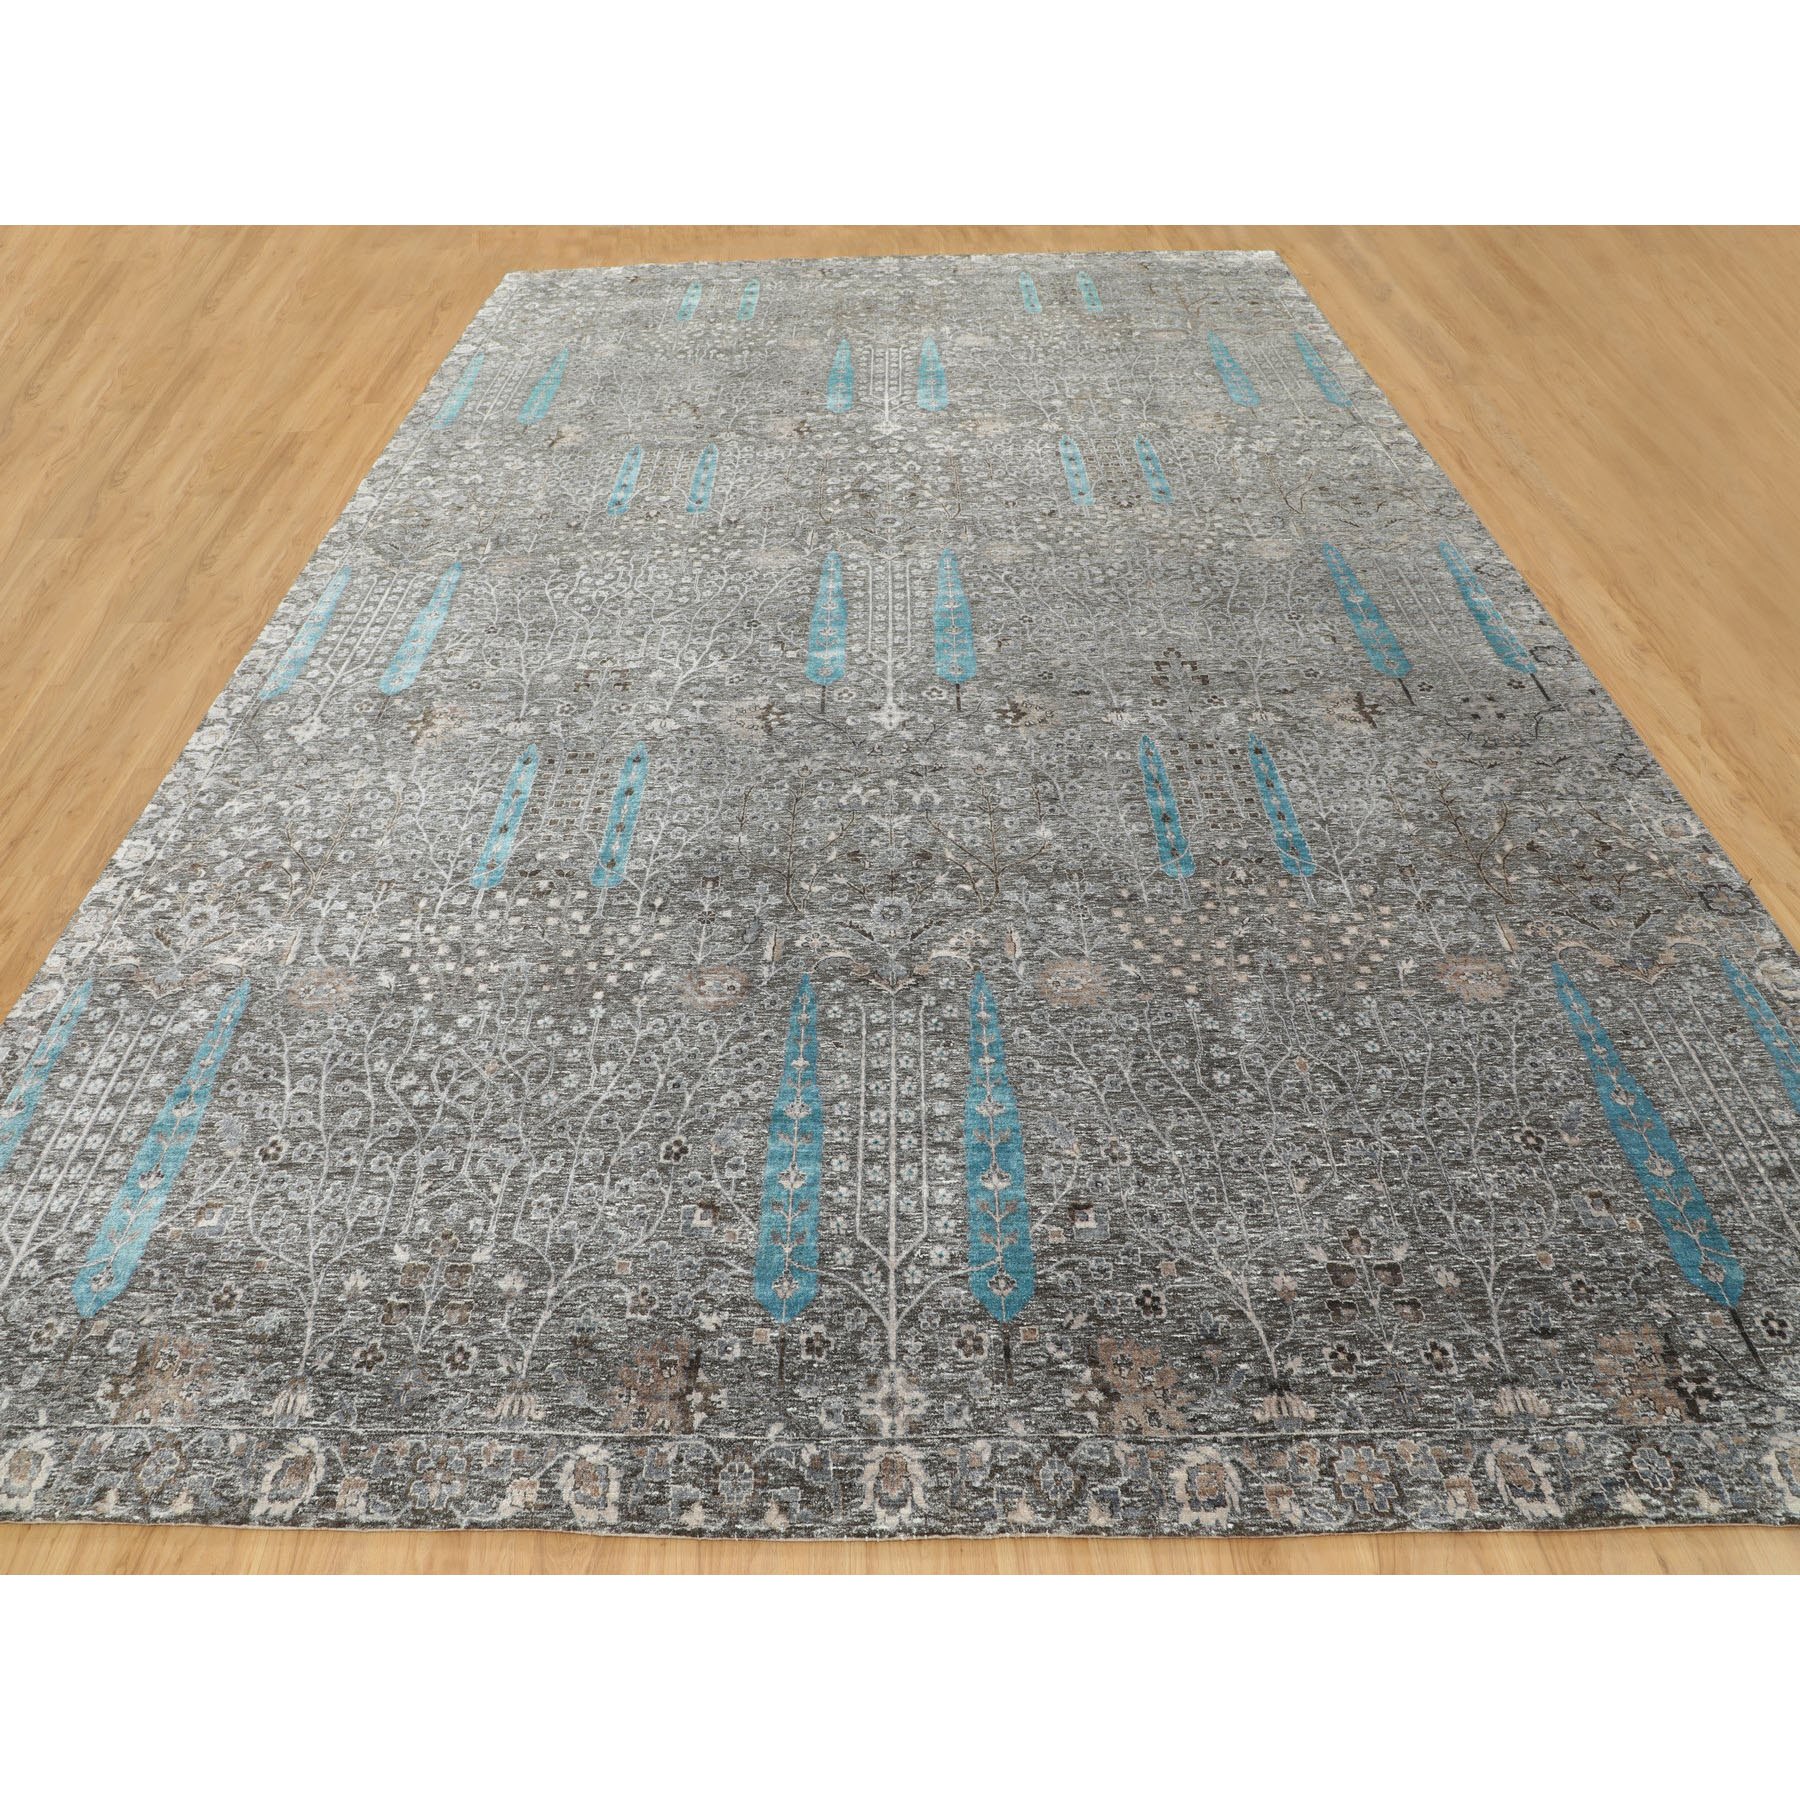 12'x17'9" Oversized Cypress Tree Design Silk with Textured Wool Hand Woven Oriental Rug 